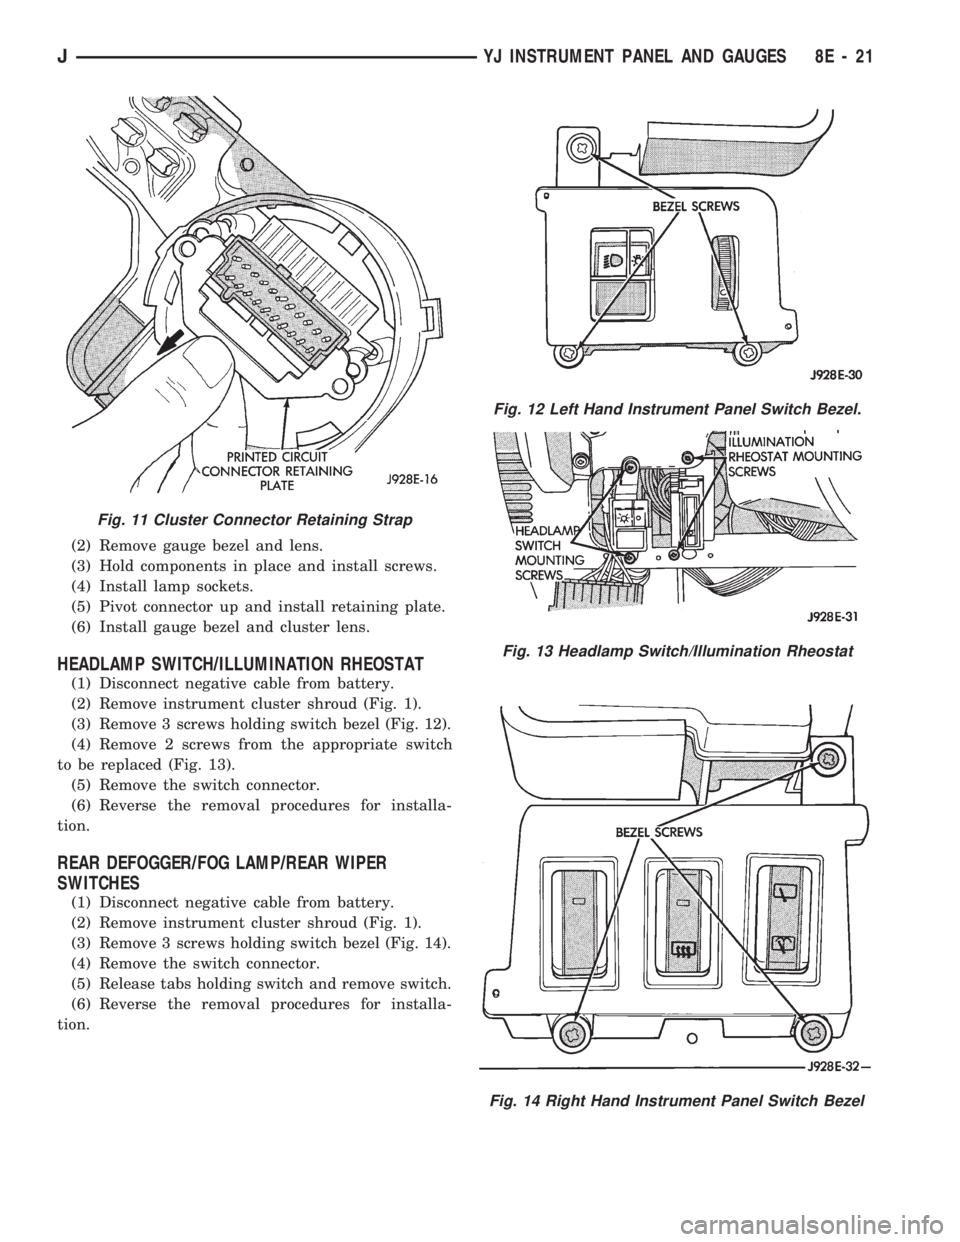 JEEP CHEROKEE 1994  Service Repair Manual (2) Remove gauge bezel and lens.
(3) Hold components in place and install screws.
(4) Install lamp sockets.
(5) Pivot connector up and install retaining plate.
(6) Install gauge bezel and cluster lens